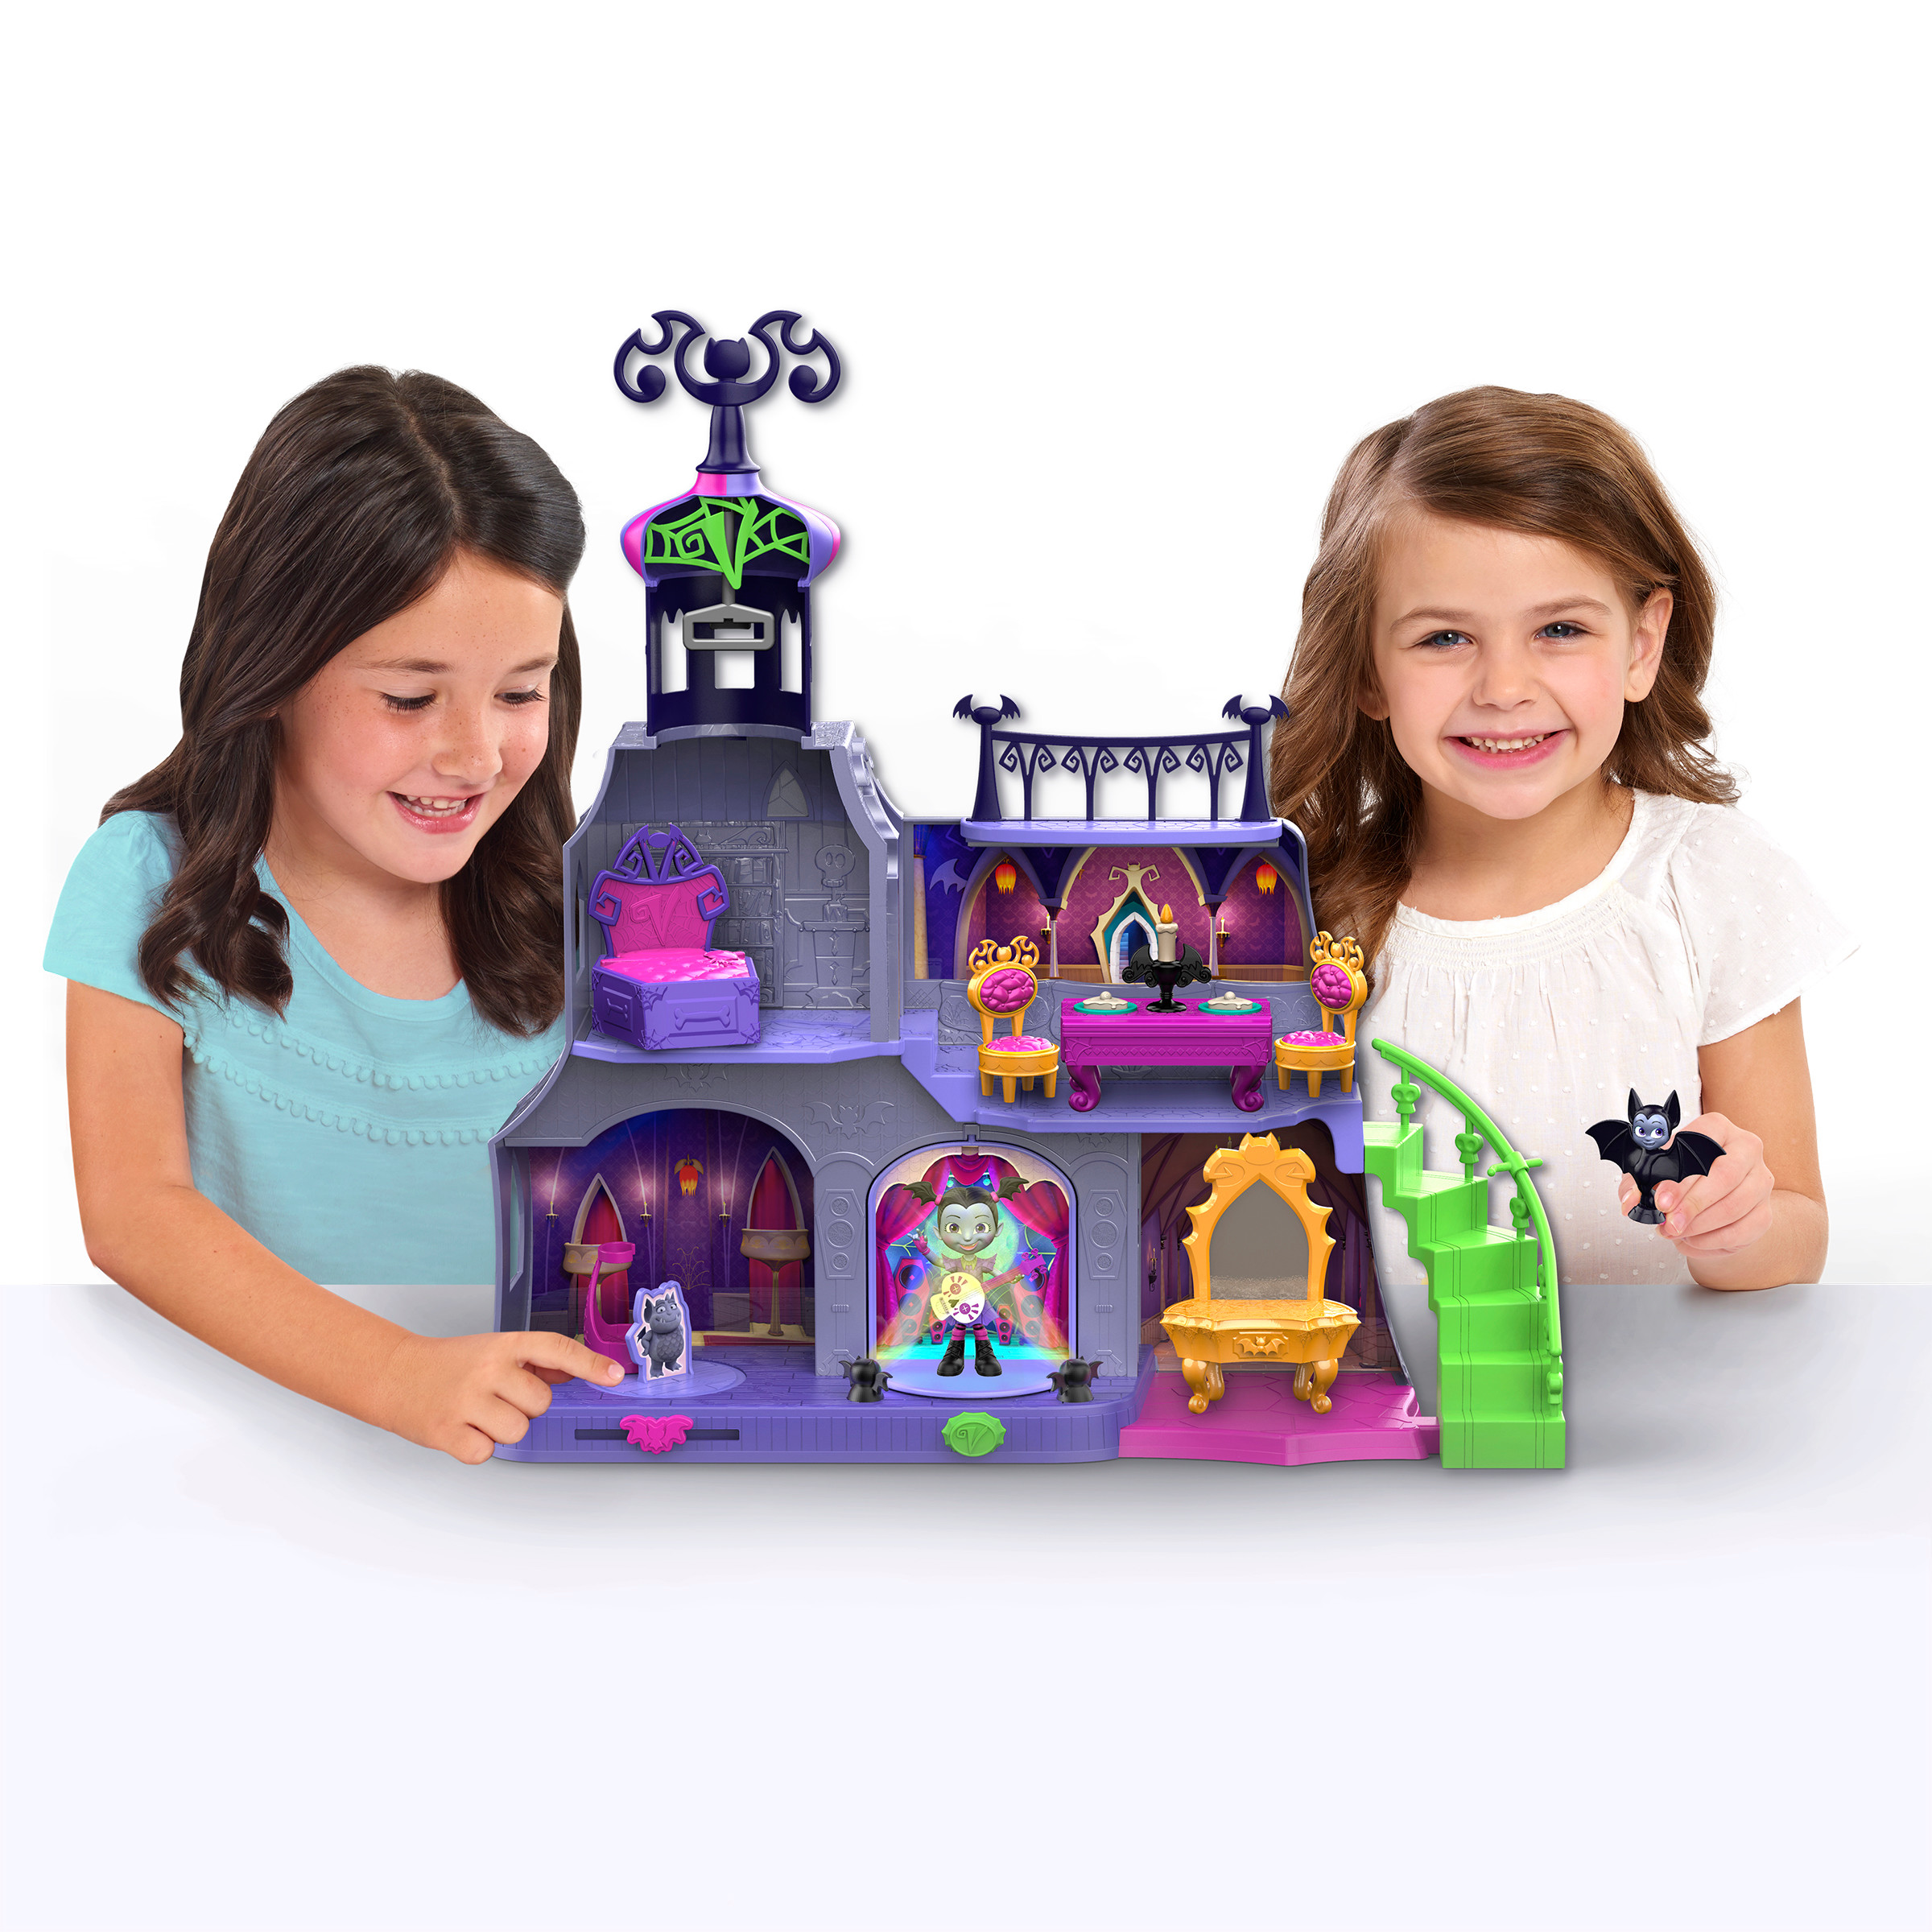 Disney Junior Vampirina Spookelton Castle, 8 Piece Dollhouse Playset with Lights and Sounds, Officially Licensed Kids Toys for Ages 3 Up, Gifts and Presents - image 3 of 3